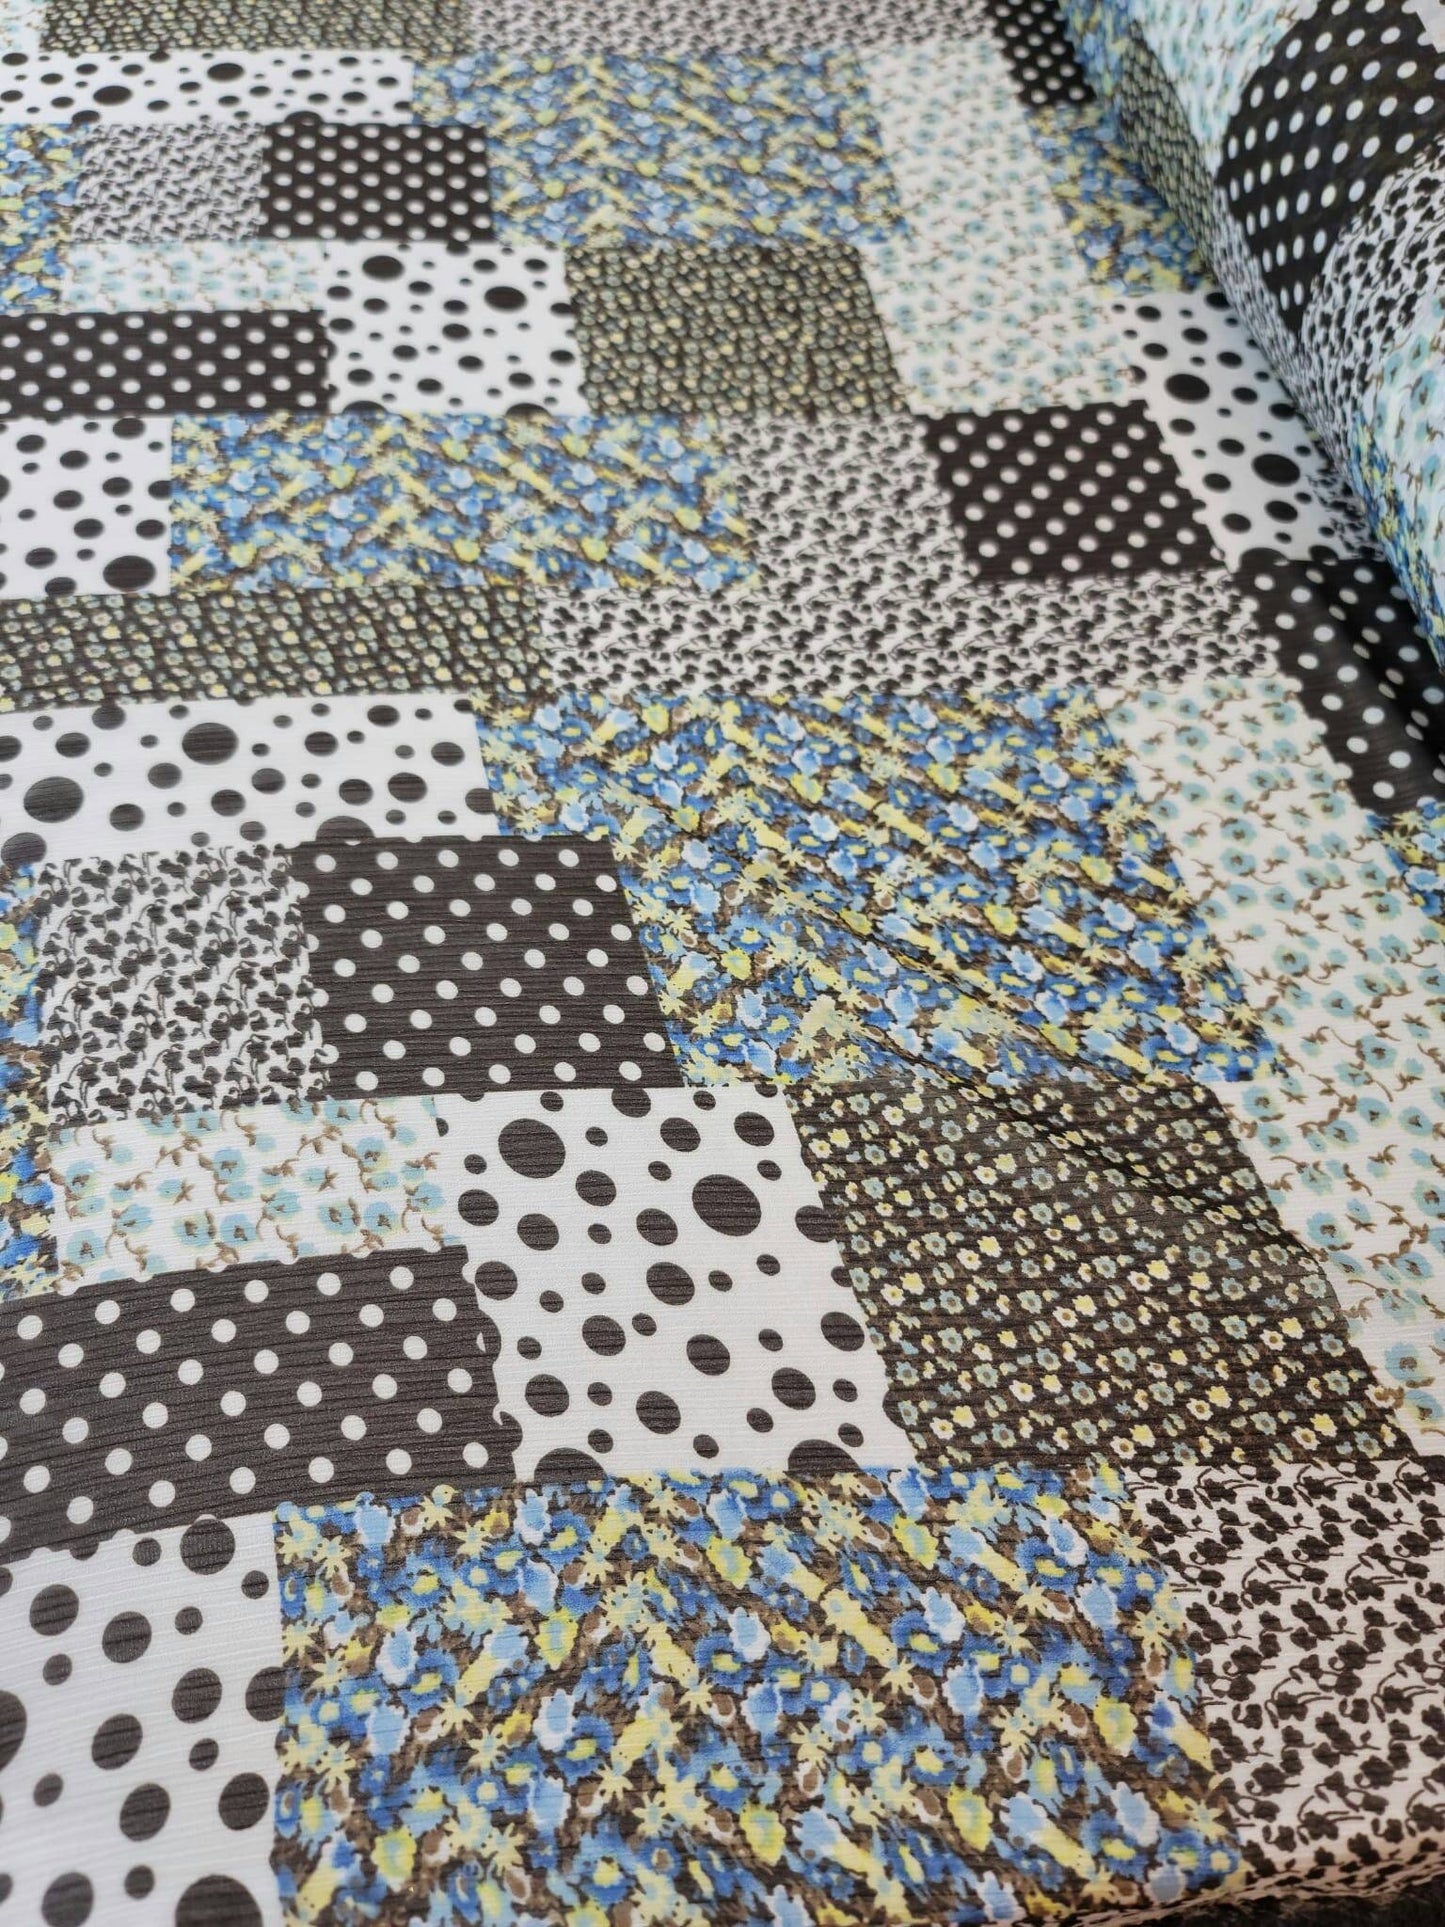 Chiffon Blue Black Floral Prom Fabric Sold by the Yard Squre Polka Dot Light Weight